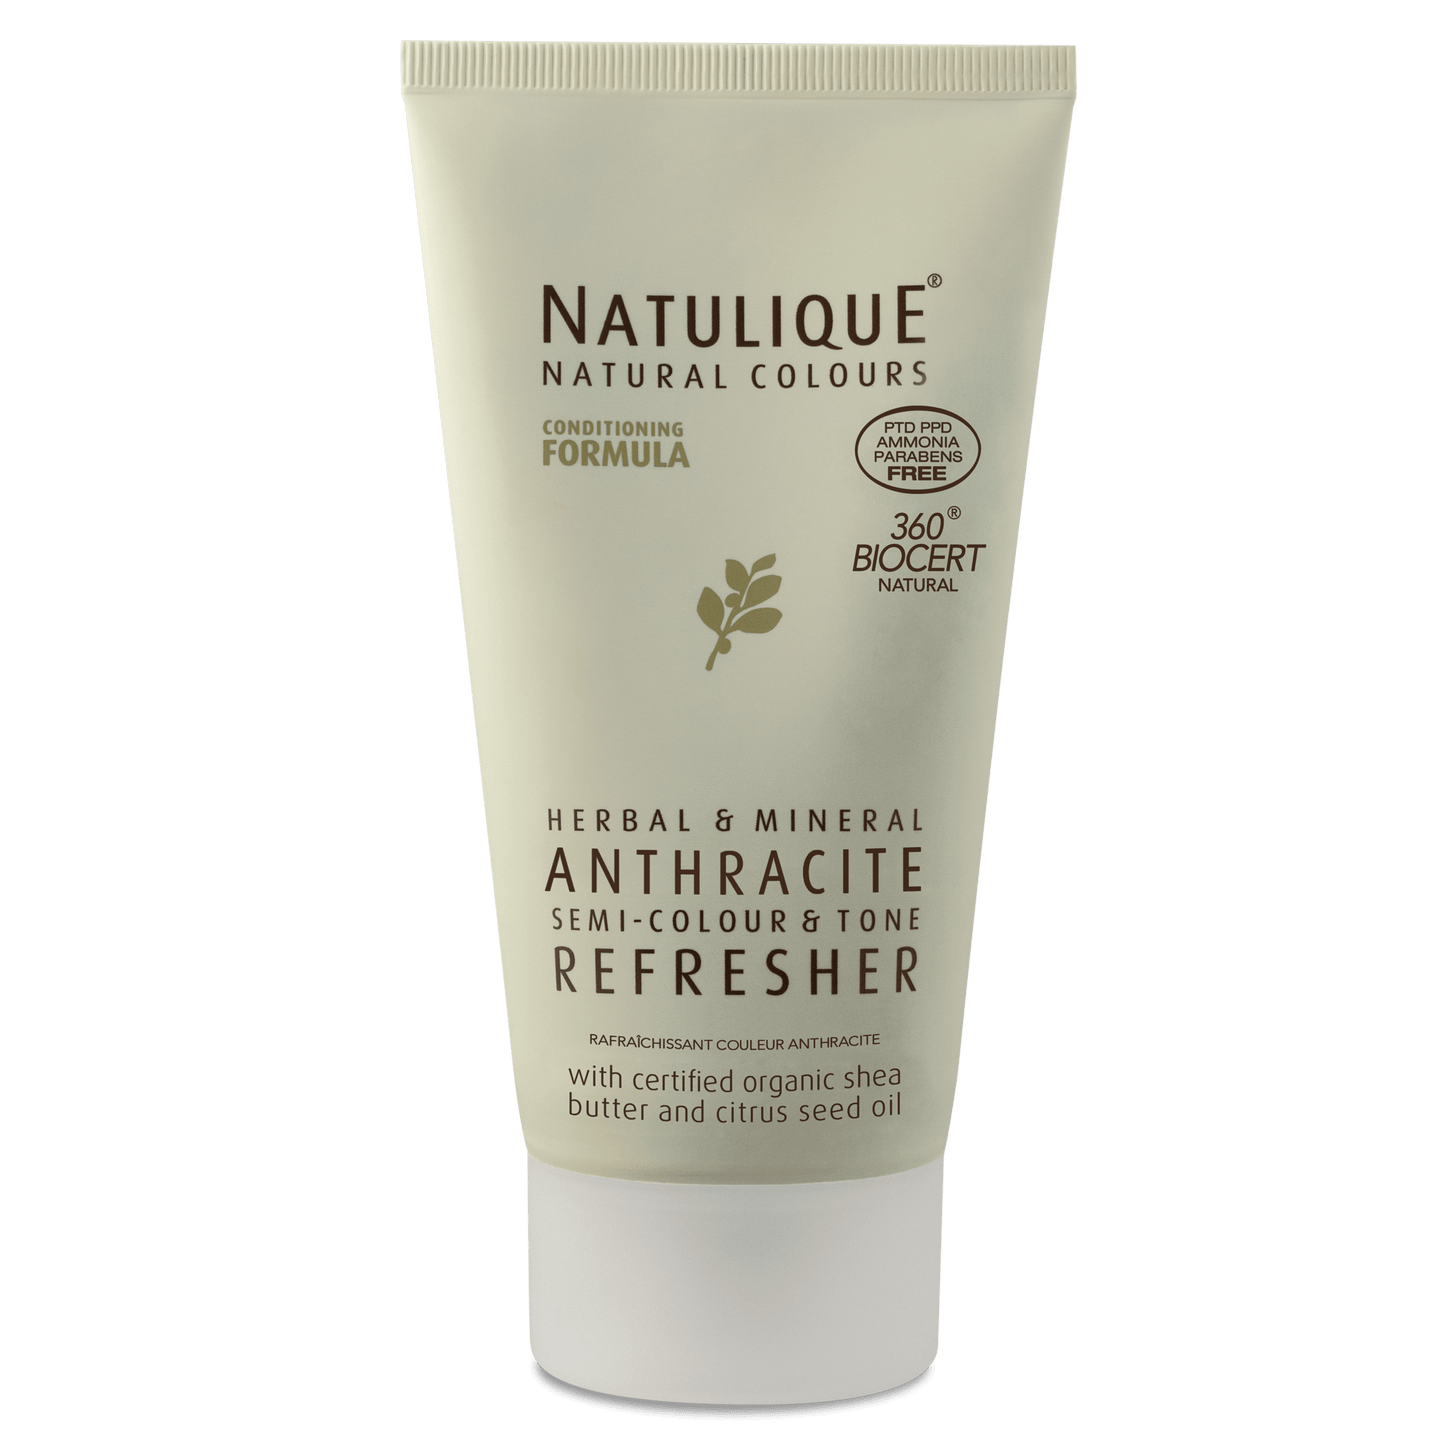 NATULIQUE NATURAL COLOUR REFRESHER ANTHRACITE 150 ml - DAMICE Hair & Nails